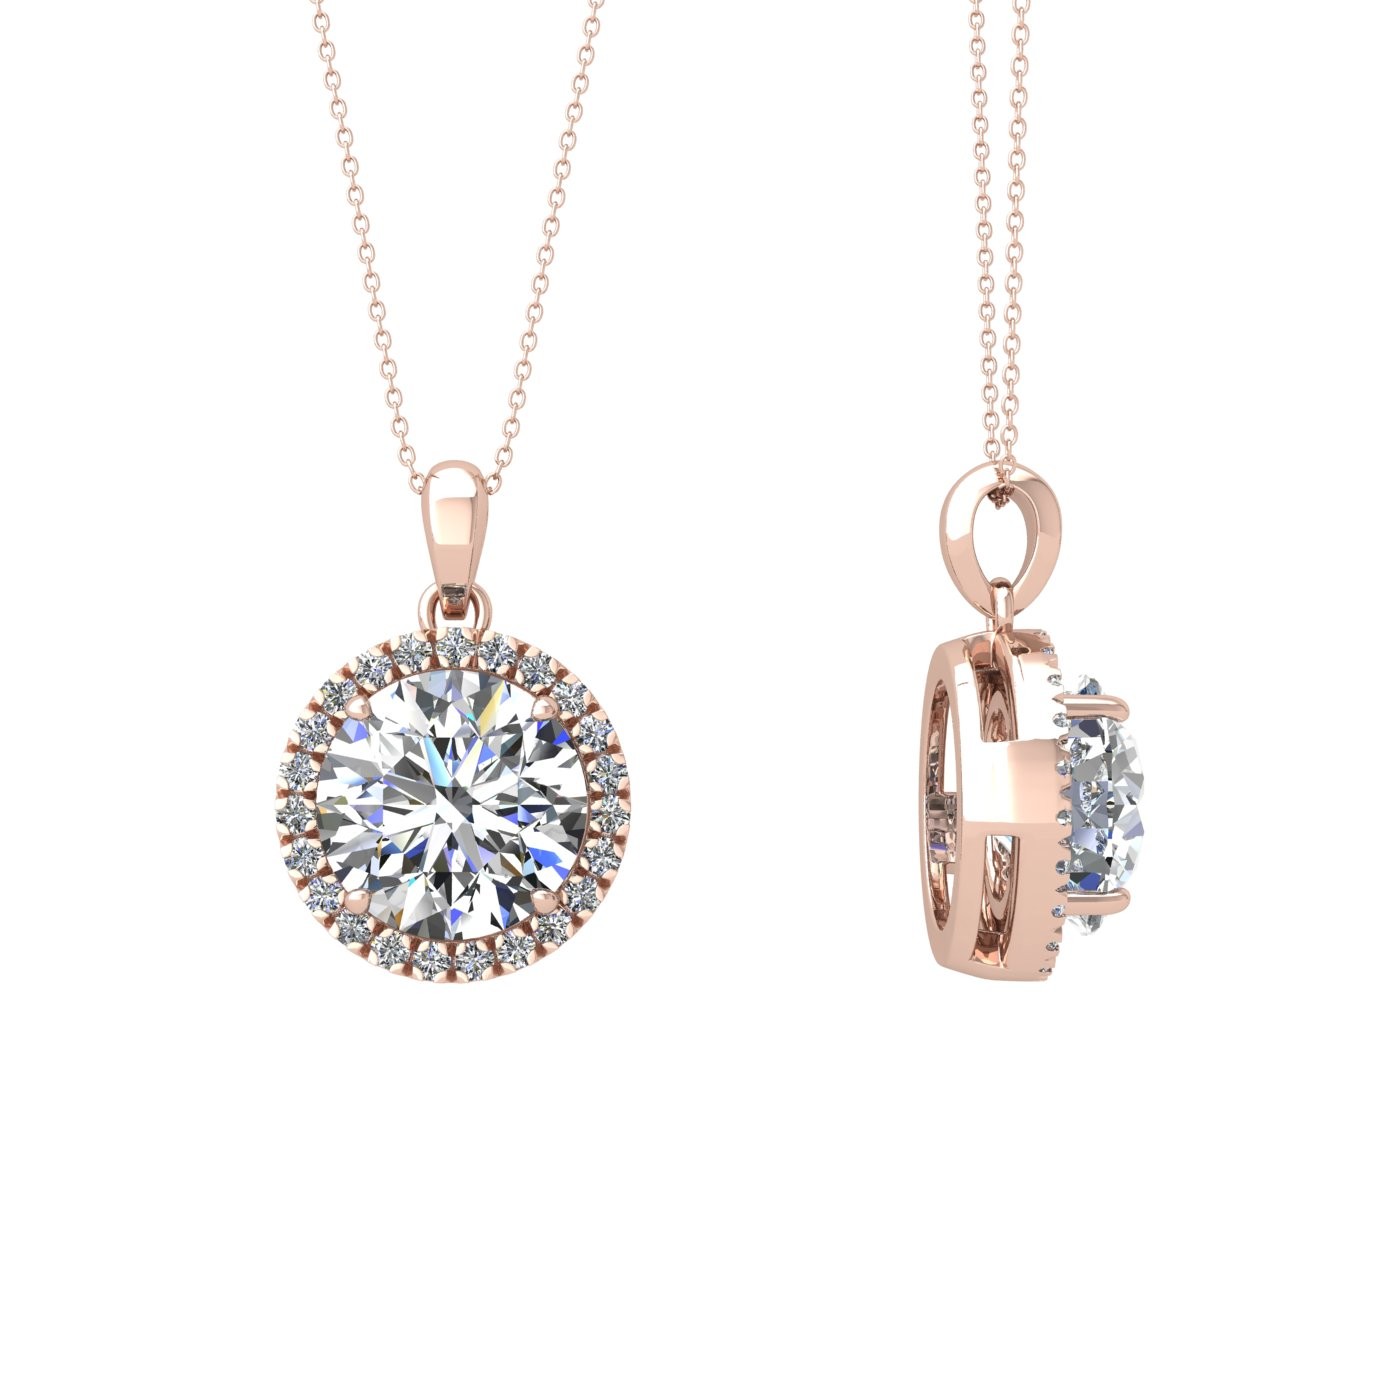 18k rose gold  1 ct 4 prong round shape diamond pendant with diamond pavÉ set halo including chain seperate from the pendant Photos & images